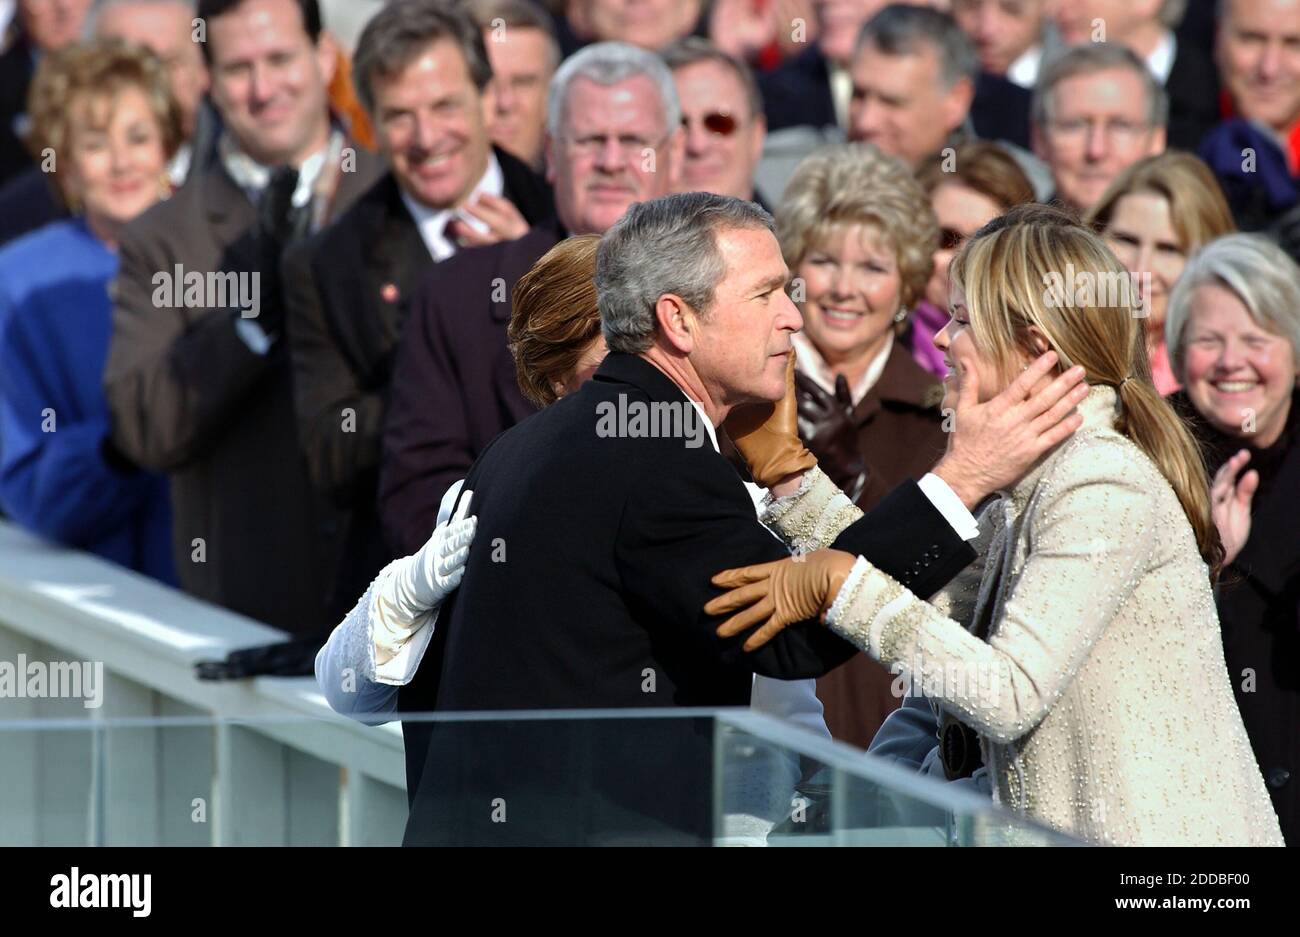 NO FILM, NO VIDEO, NO TV, NO DOCUMENTARY - President George W. Bush embraces daughter Jenna after being sworn in as U.S. President for a second term, in Washington, DC, USA, on January 20, 2005. Photo by Michael Bryant/US News Story Slugged/KRT/ABACA. Stock Photo